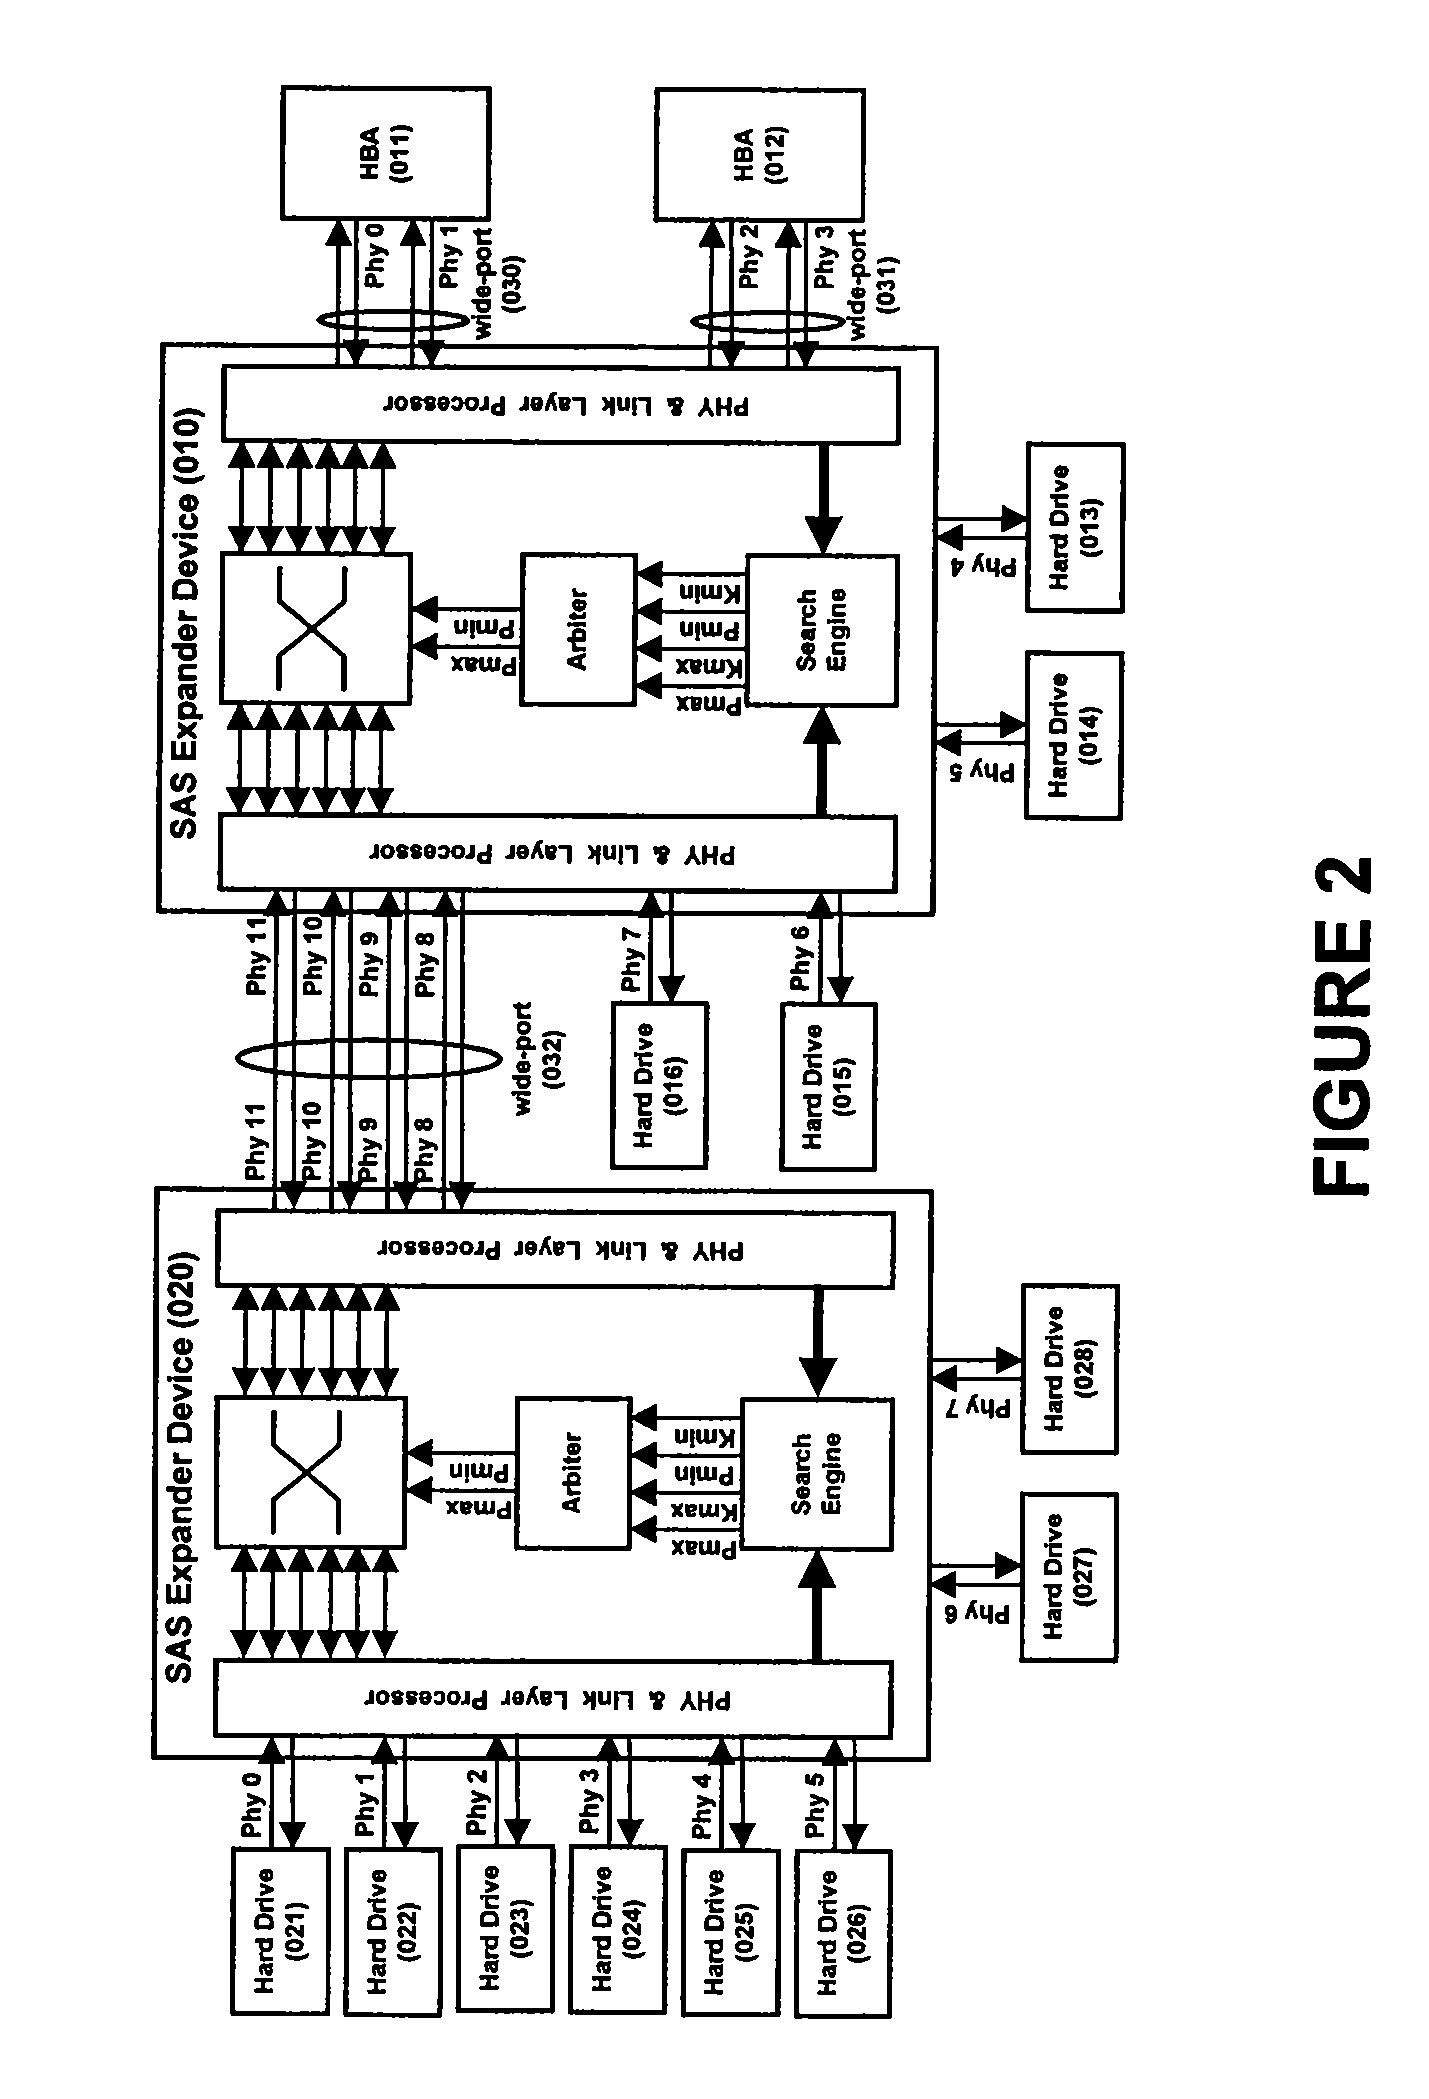 Connection management in serial attached SCSI (SAS) expanders